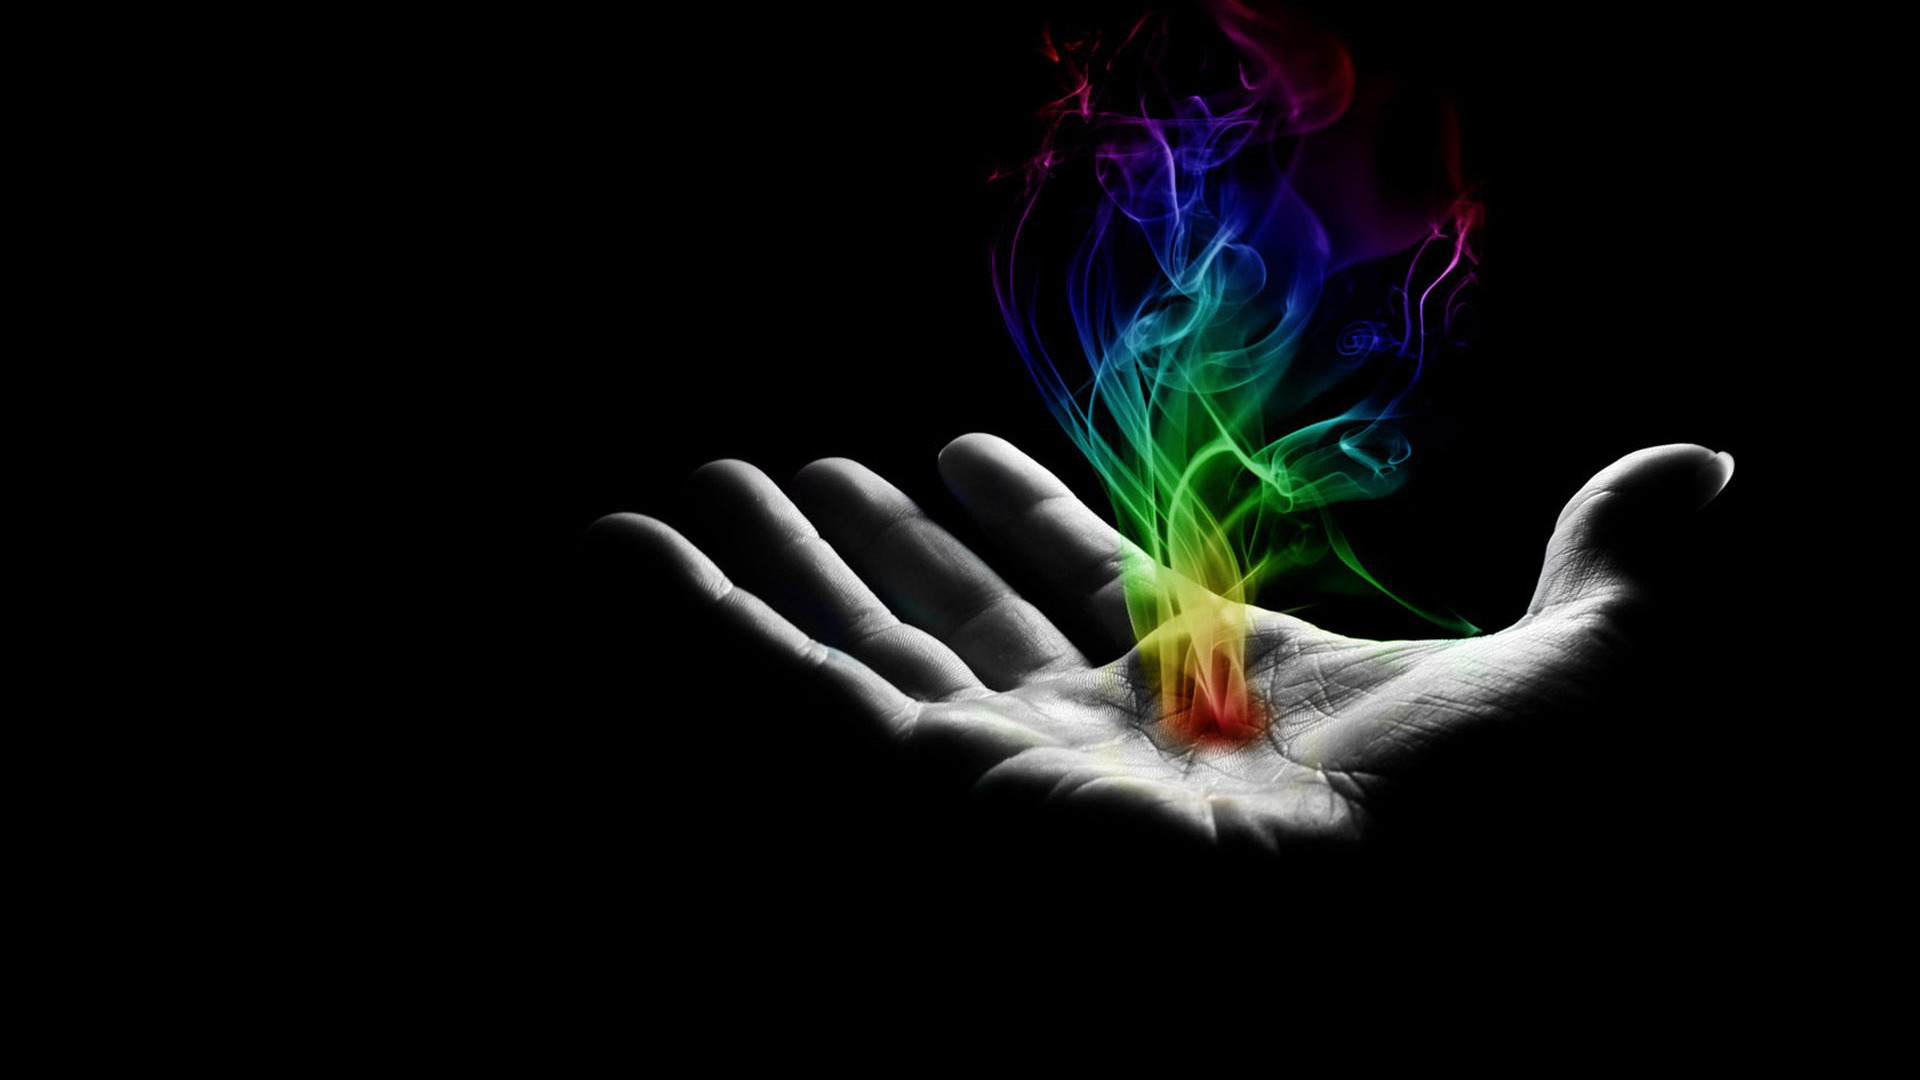 Download Colorful smoke in hand wallpaper